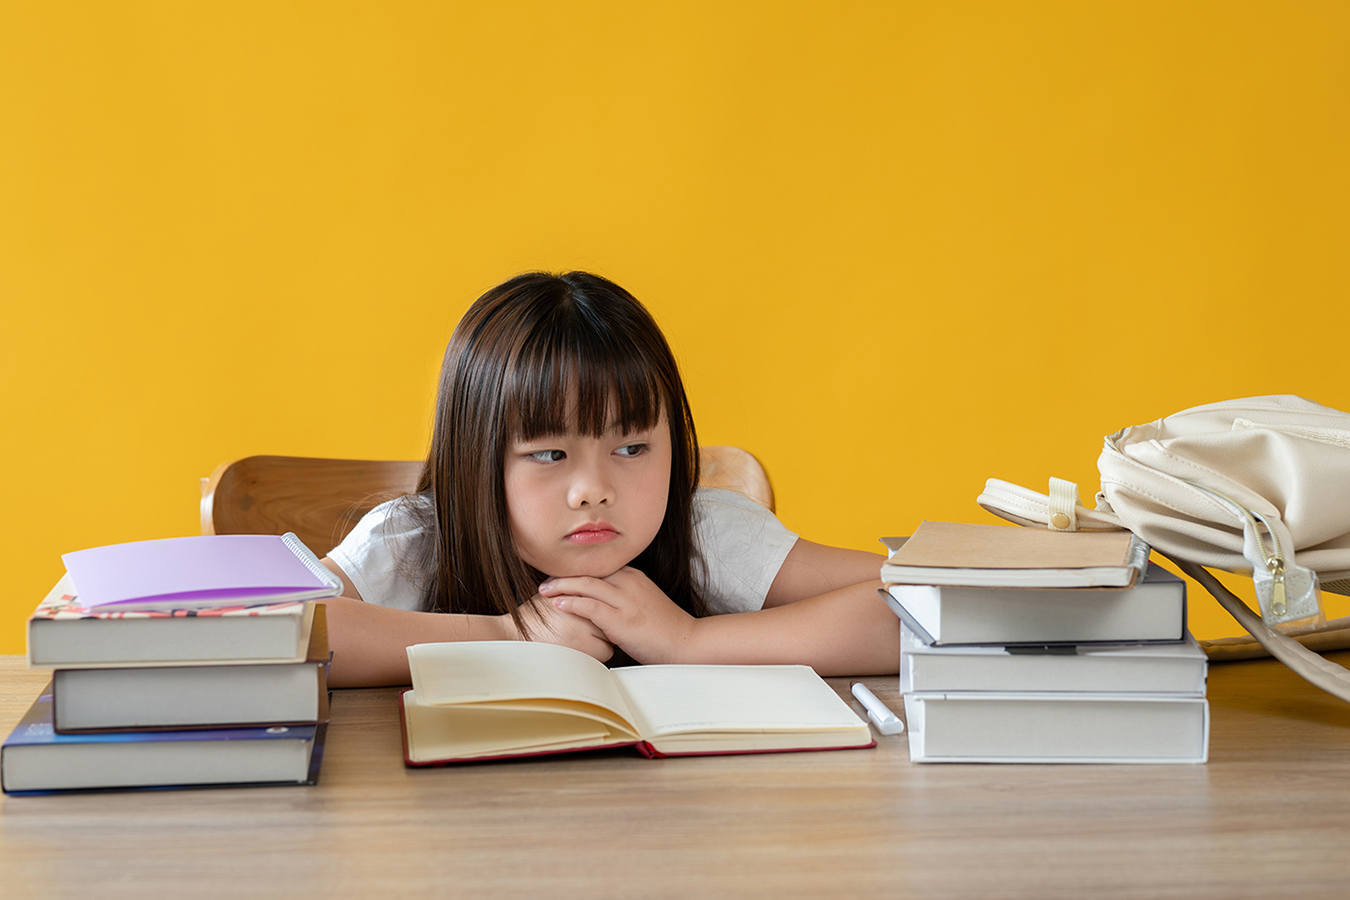 An adorable young girl sitting at her study table with a bored face, doesn't want to study or read